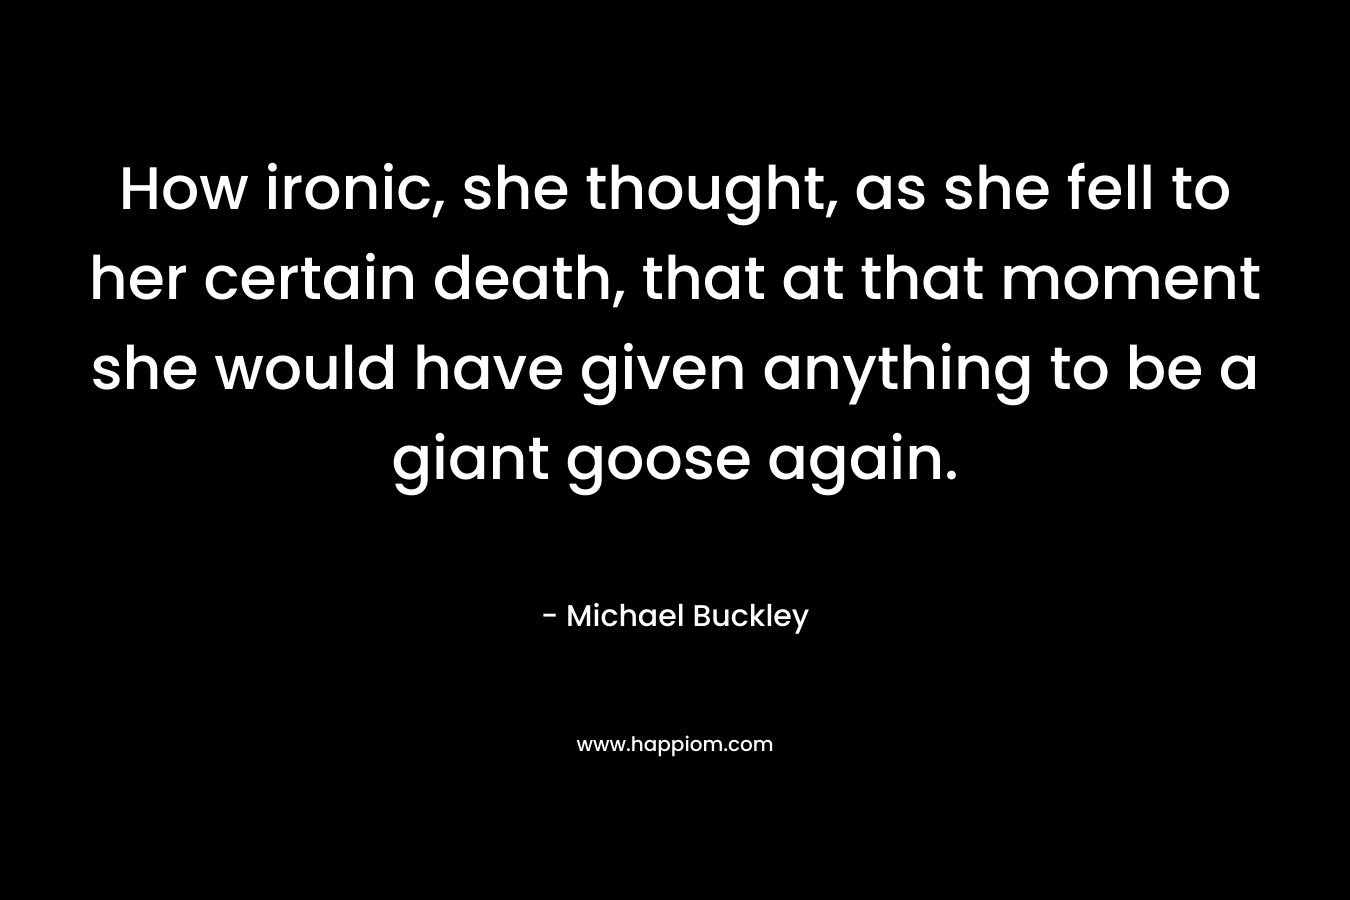 How ironic, she thought, as she fell to her certain death, that at that moment she would have given anything to be a giant goose again. – Michael Buckley